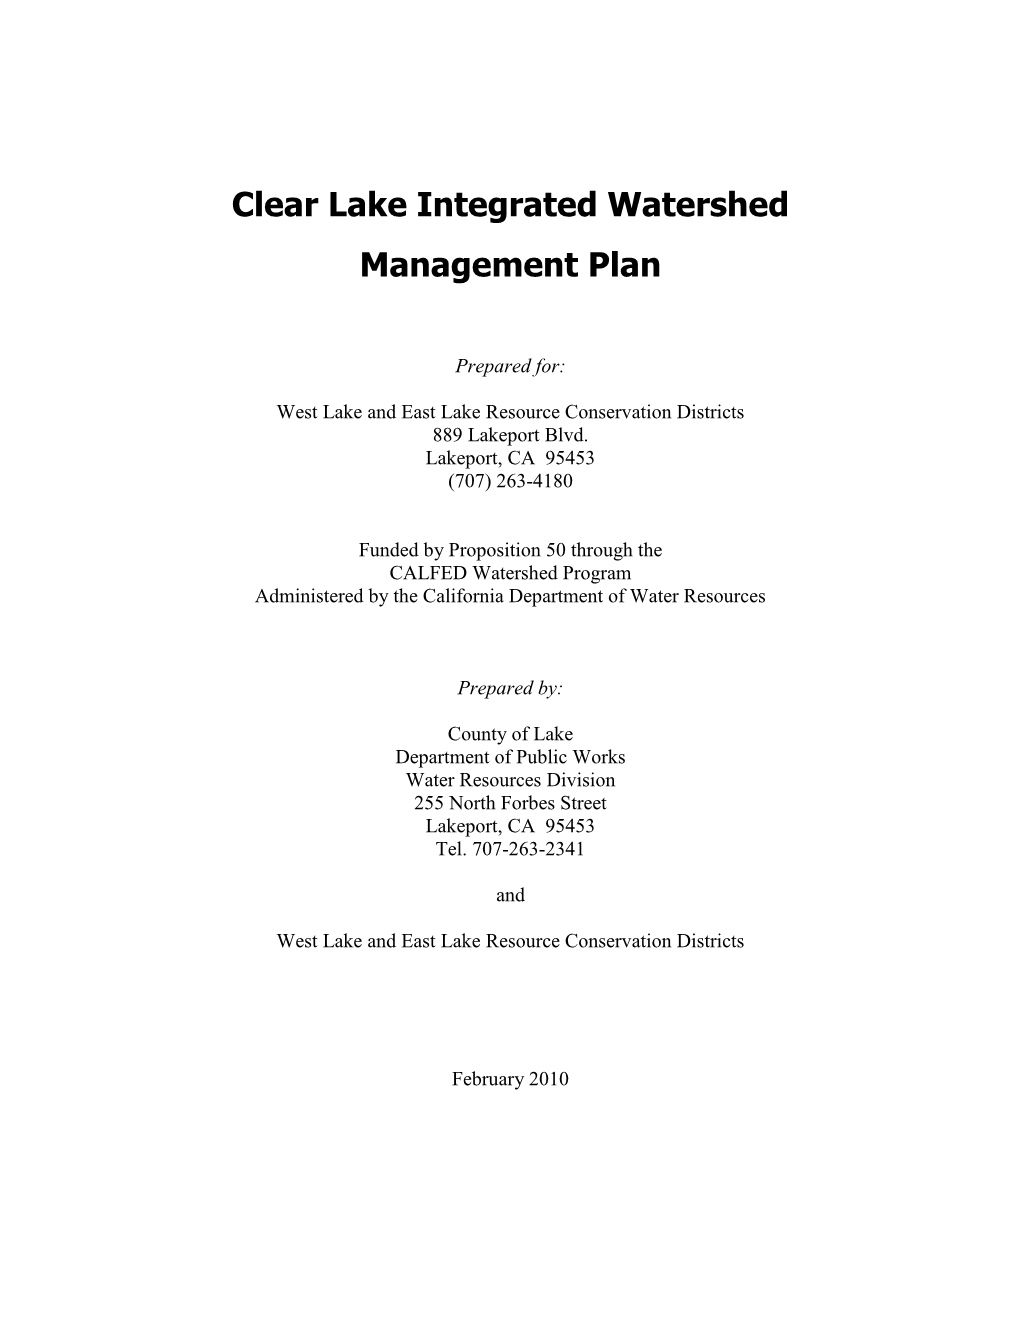 Clear Lake Integrated Watershed Management Plan